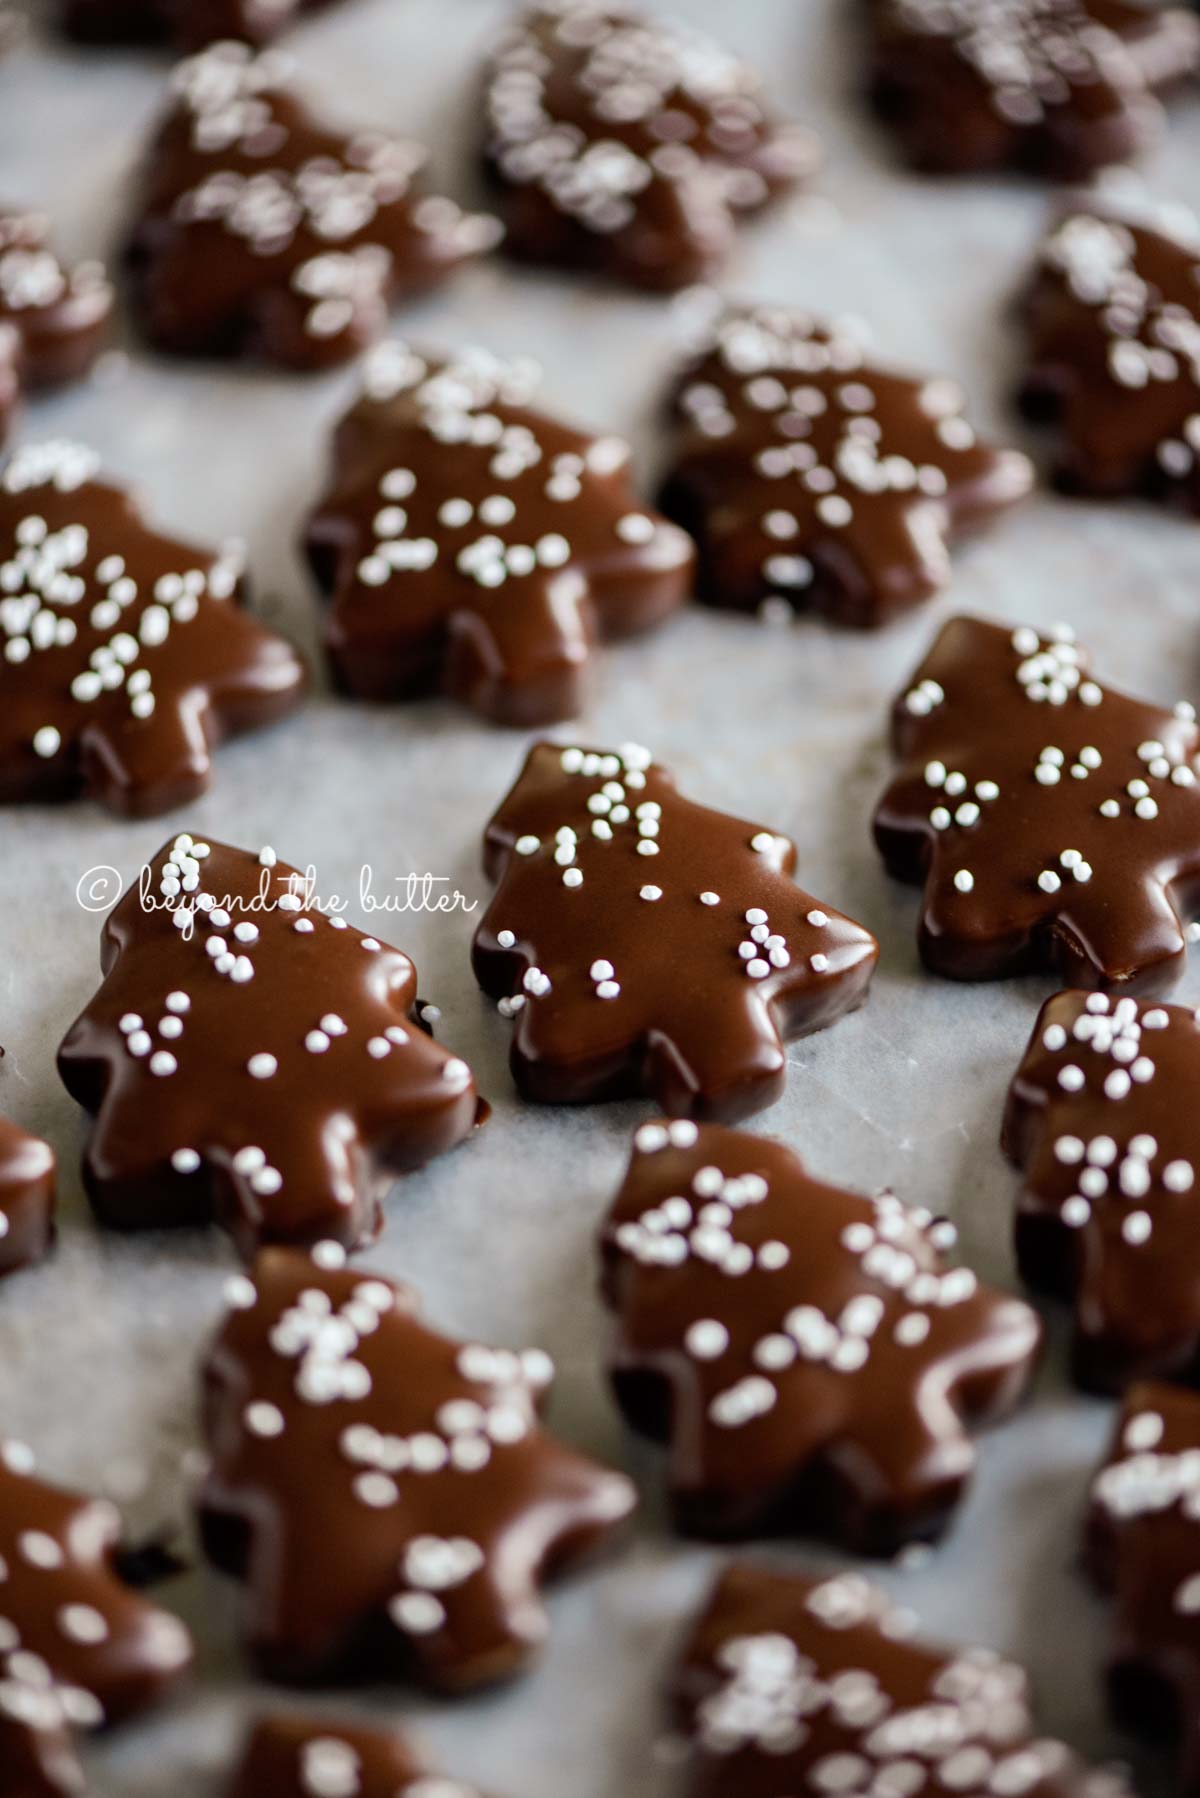 Close up image of Chocolate Dipped Graham Cracker Chrismtas Trees topped with white nonpareils on a wax paper lined baking sheet.